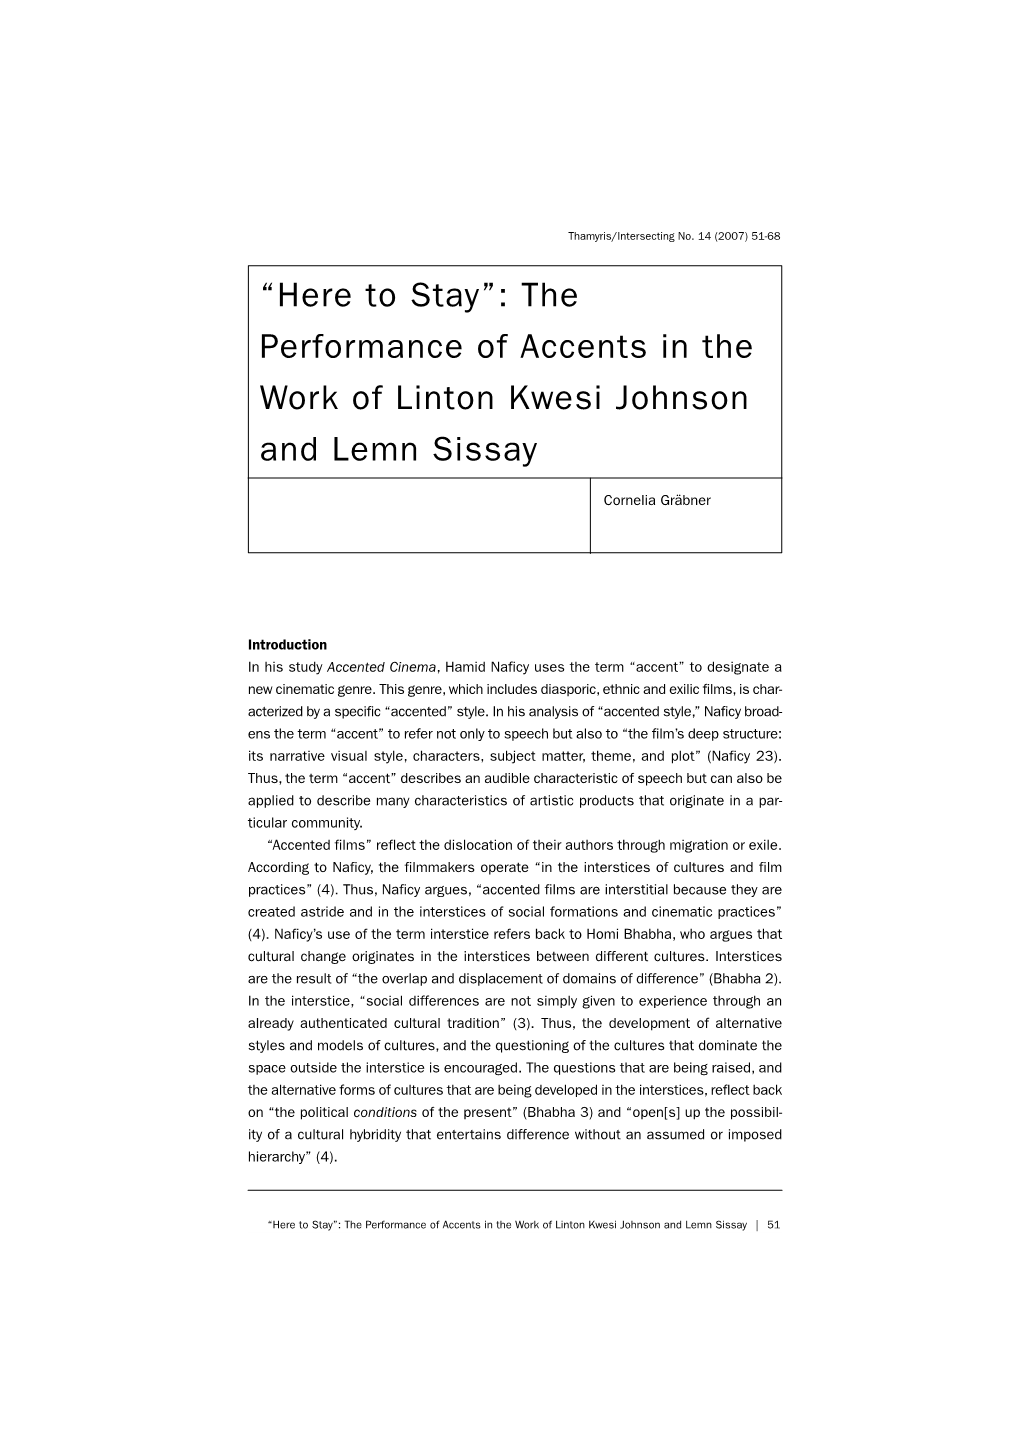 The Performance of Accents in the Work of Linton Kwesi Johnson and Lemn Sissay